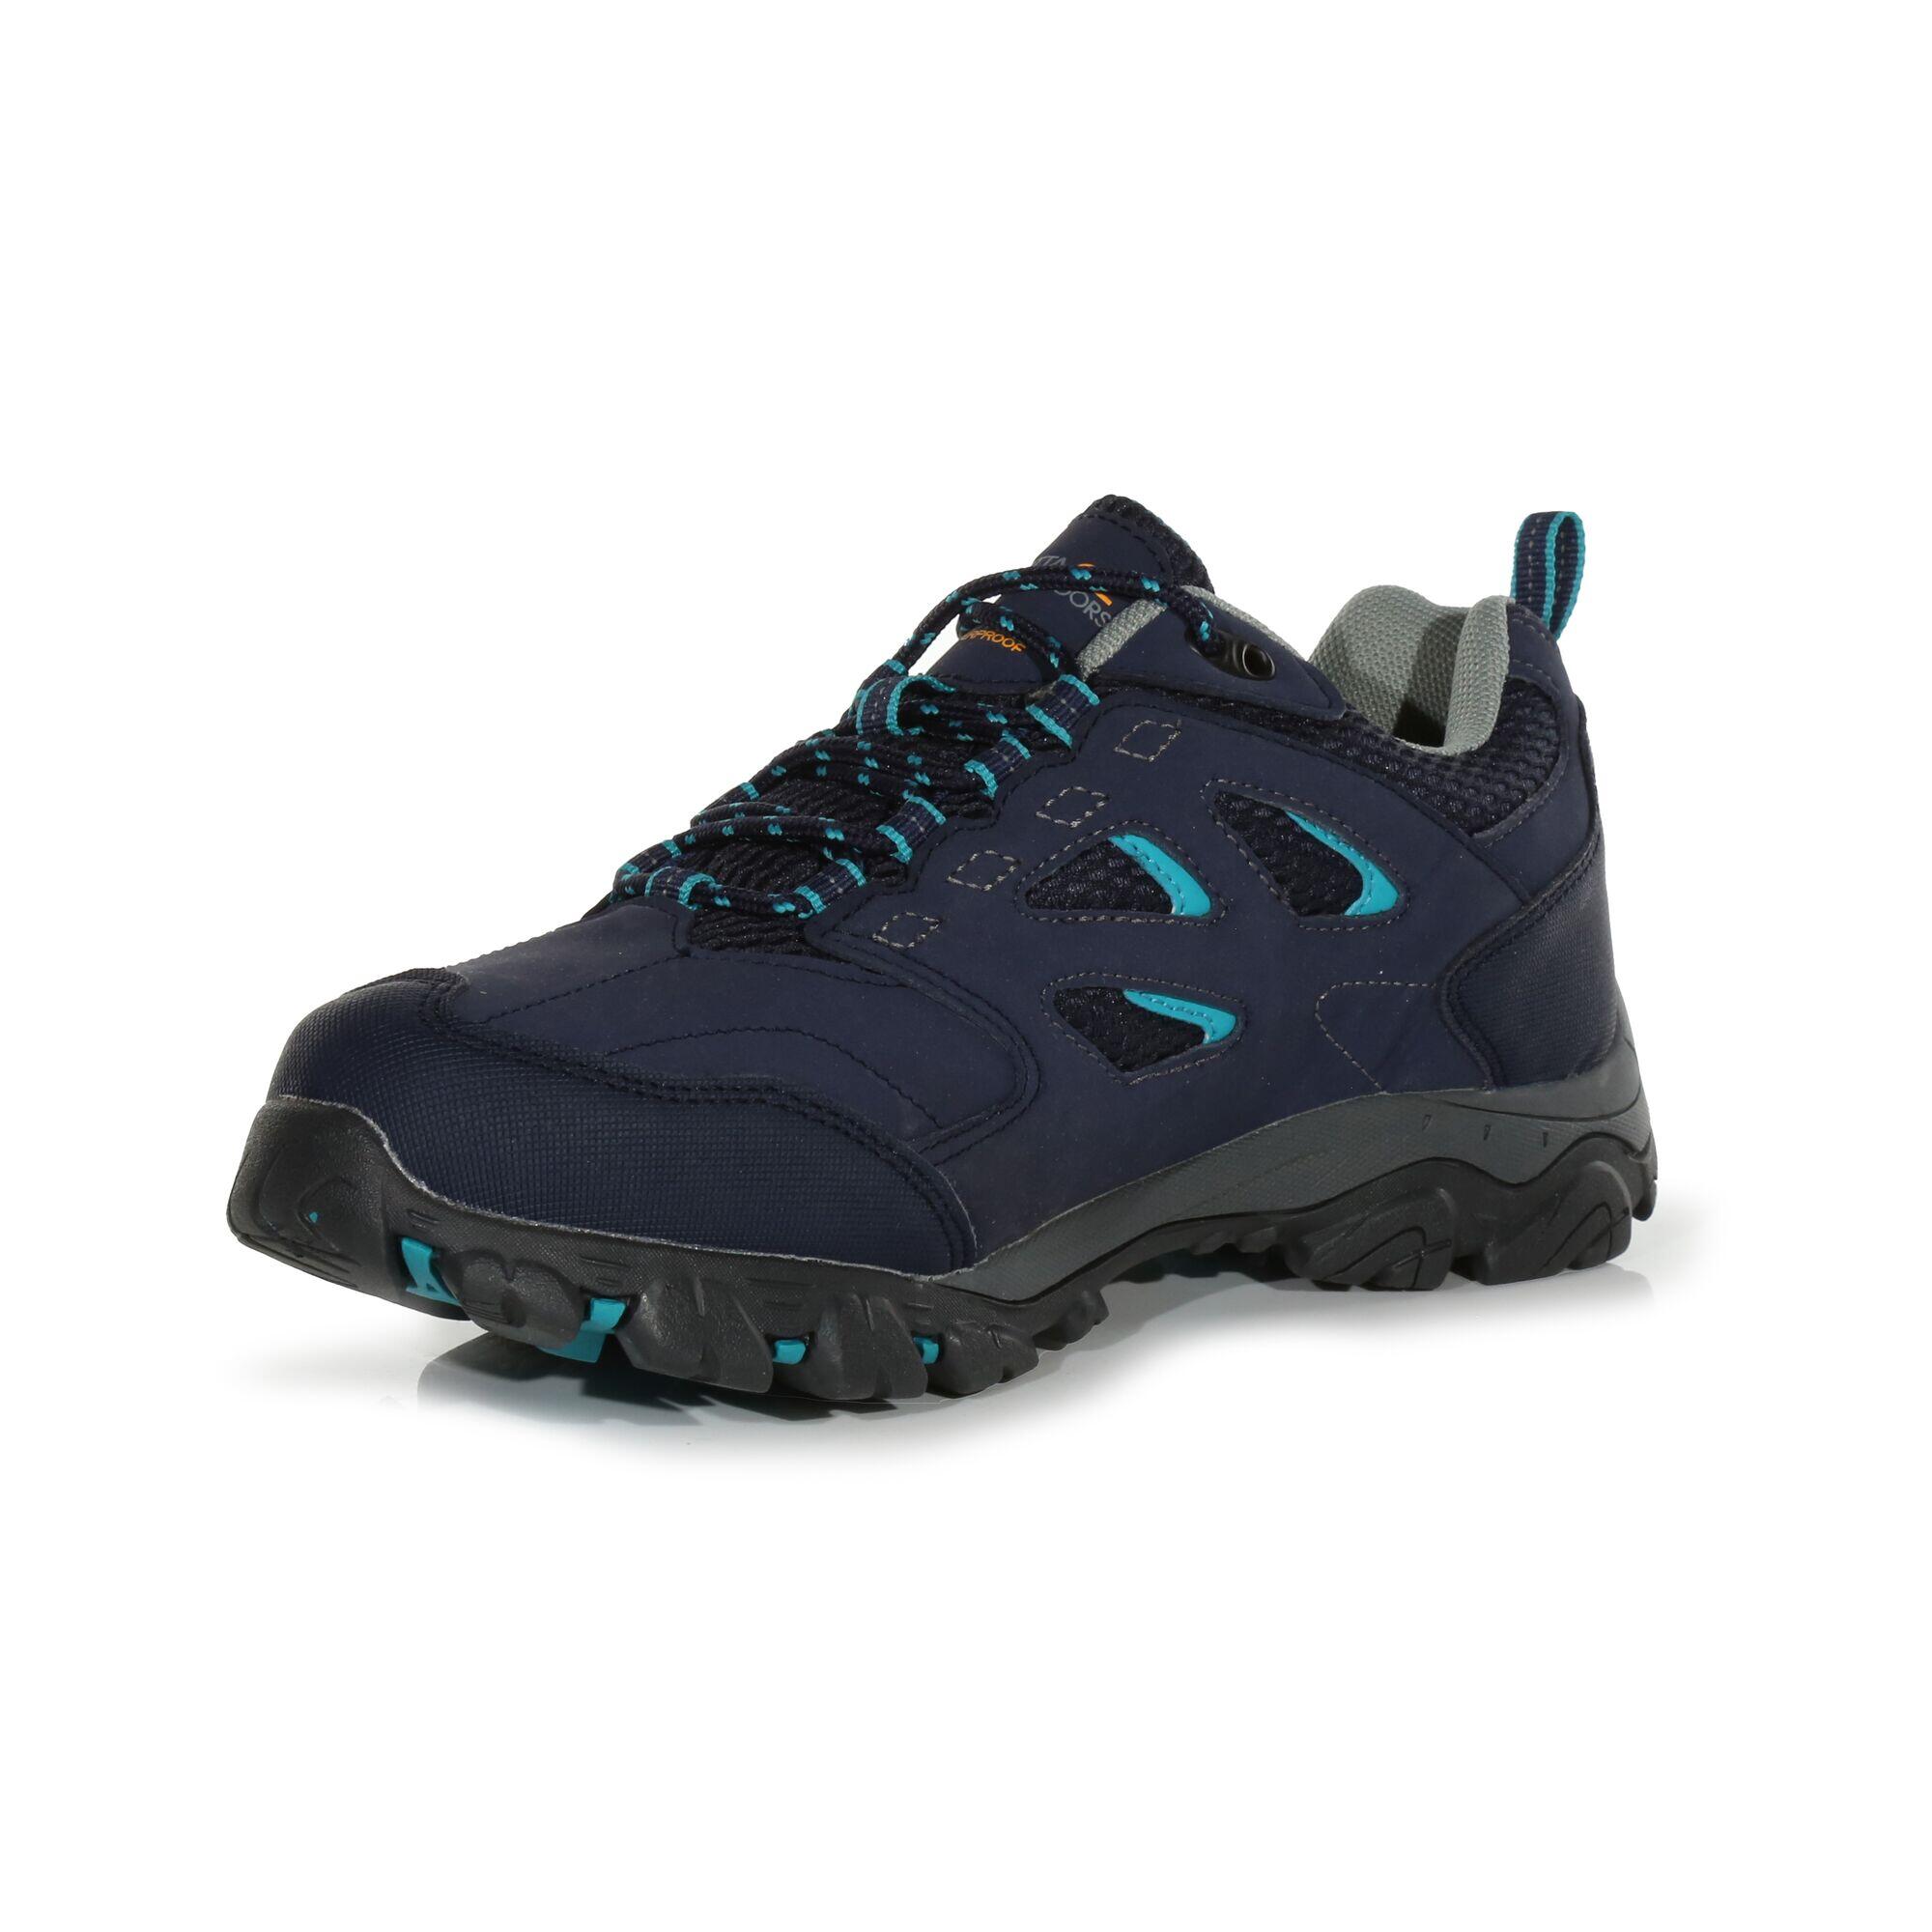 Lady Holcombe IEP Low Women's Hiking Boots - Navy 3/5